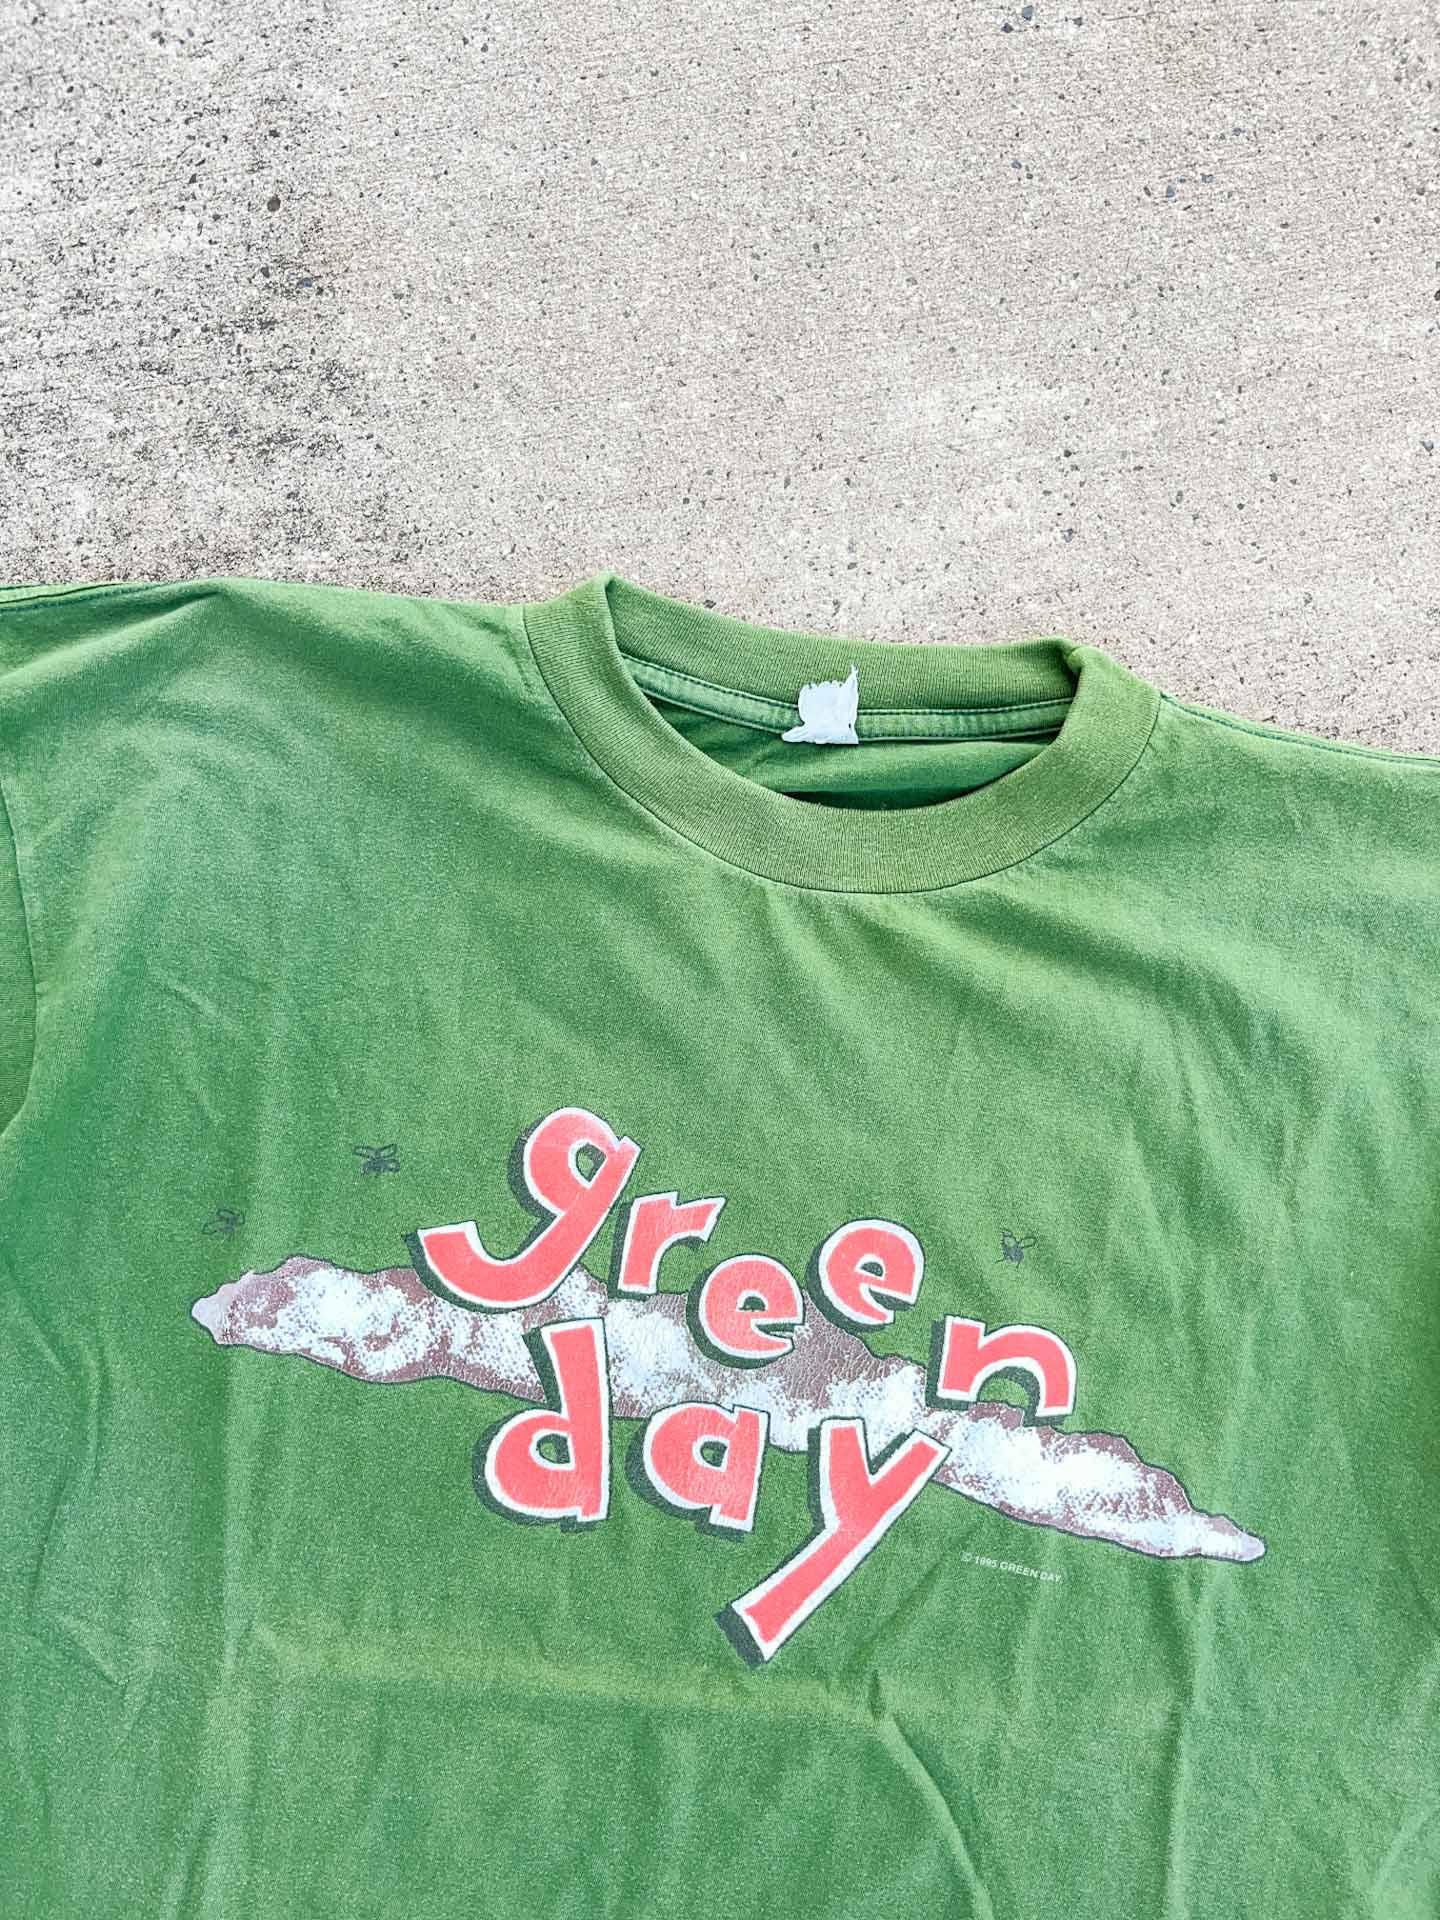 1995 Green Day Band-Shirt - secondvintage